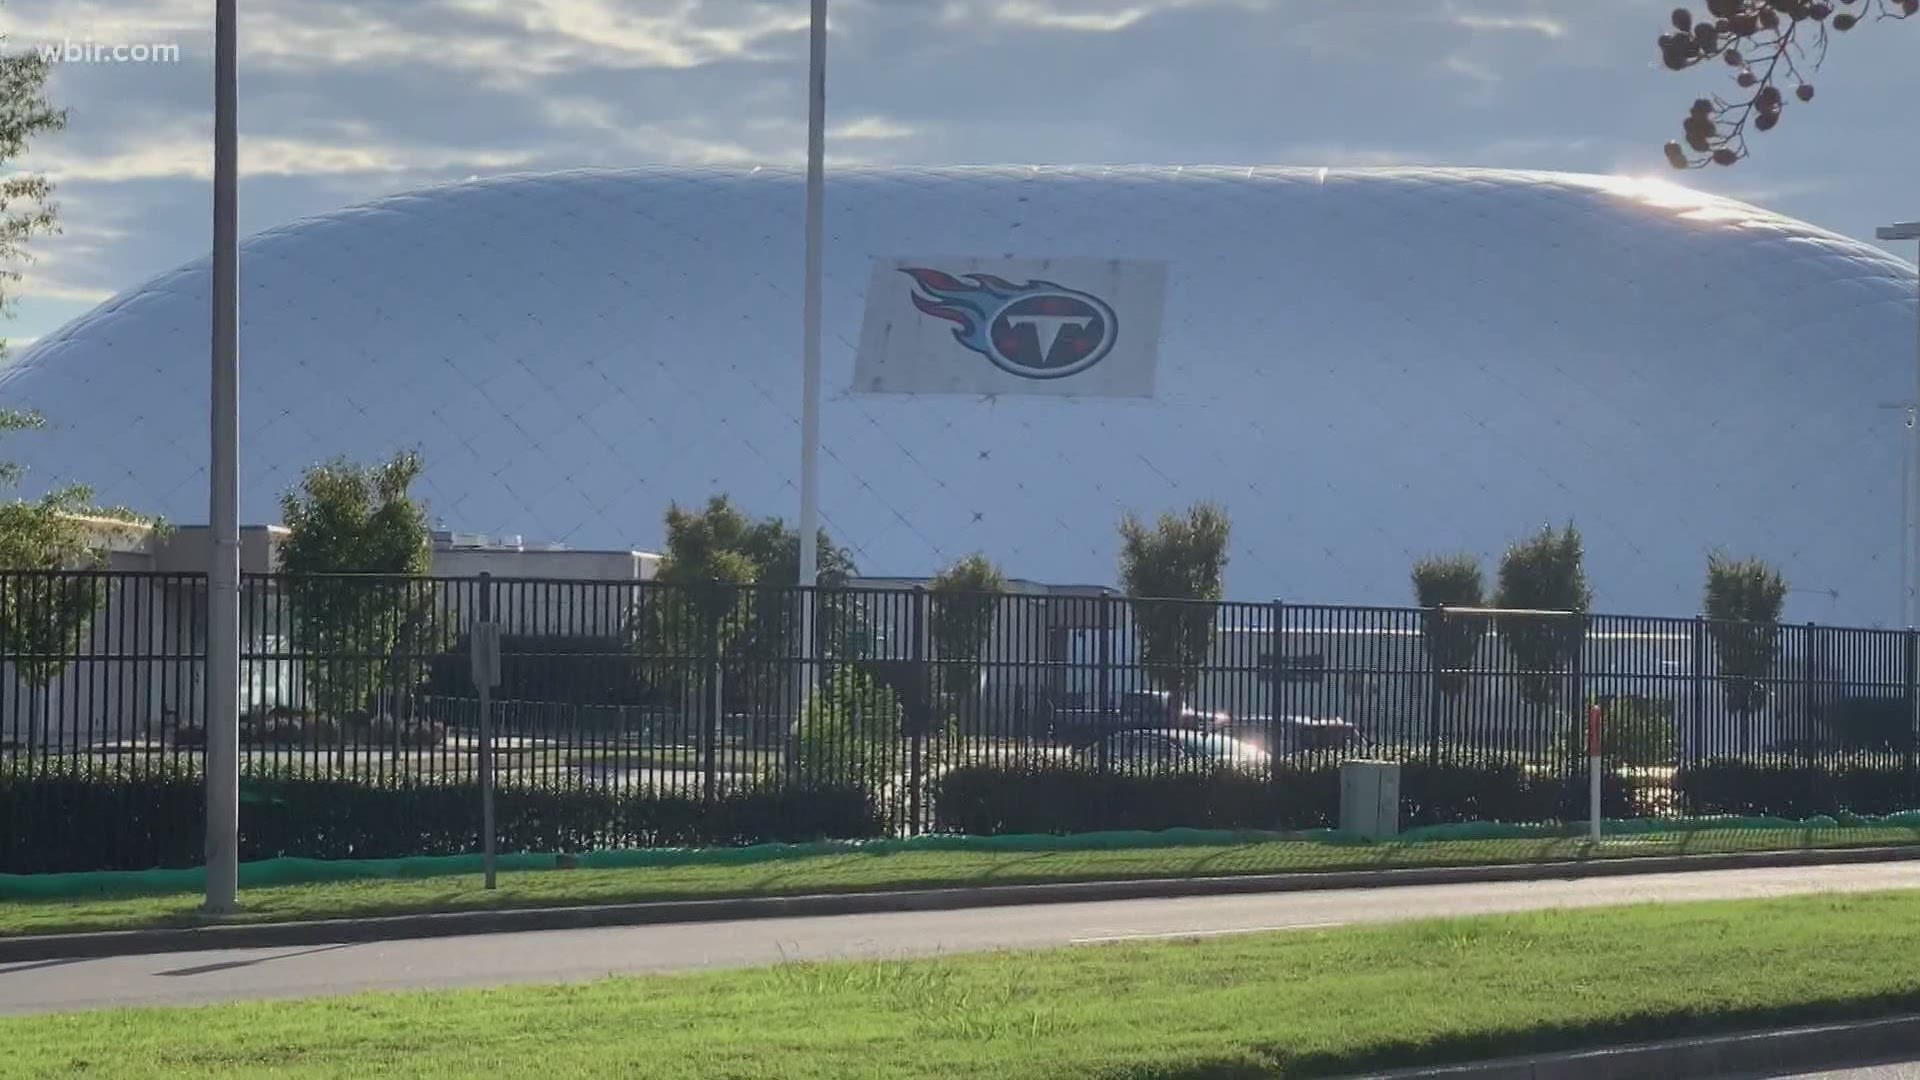 The Tennessee Titans' facilities are closed again after a coach tested positive for COVID-19 Sunday morning.